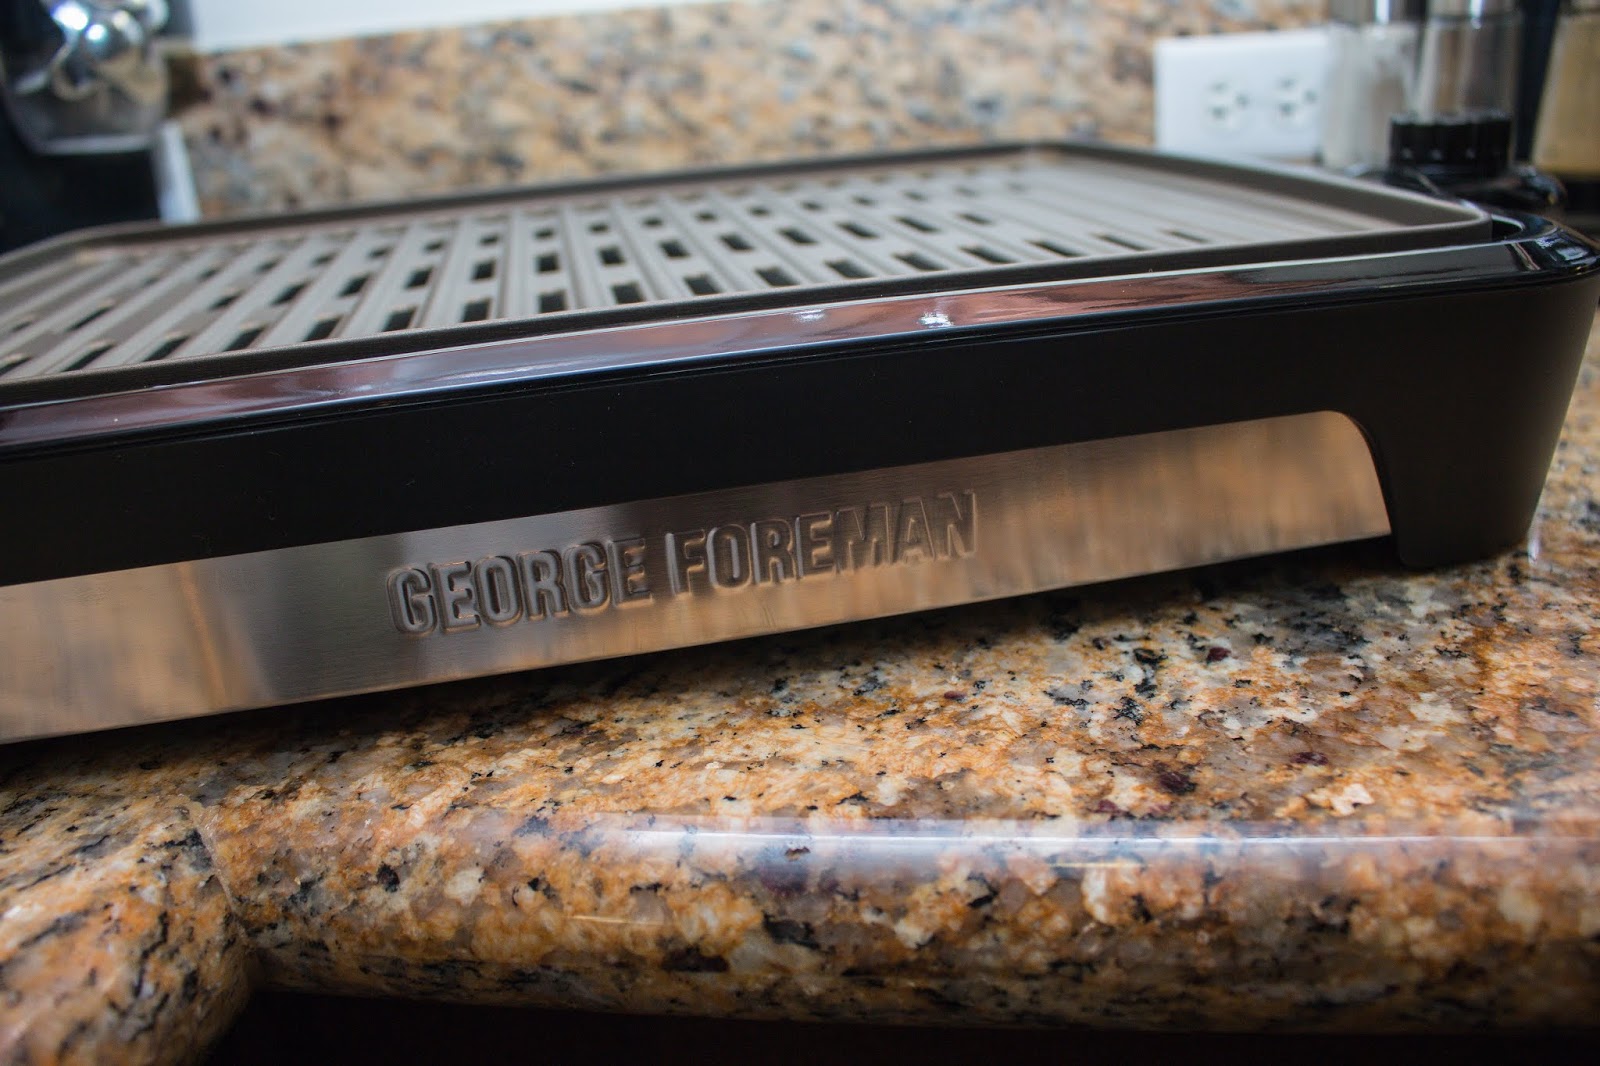 George Foreman Cooking - Our new Smokeless Grill Series features an open  grate design that produces up to 80% less smoke*. Go smokeless with your  grilling and bring the outdoor experience indoors!